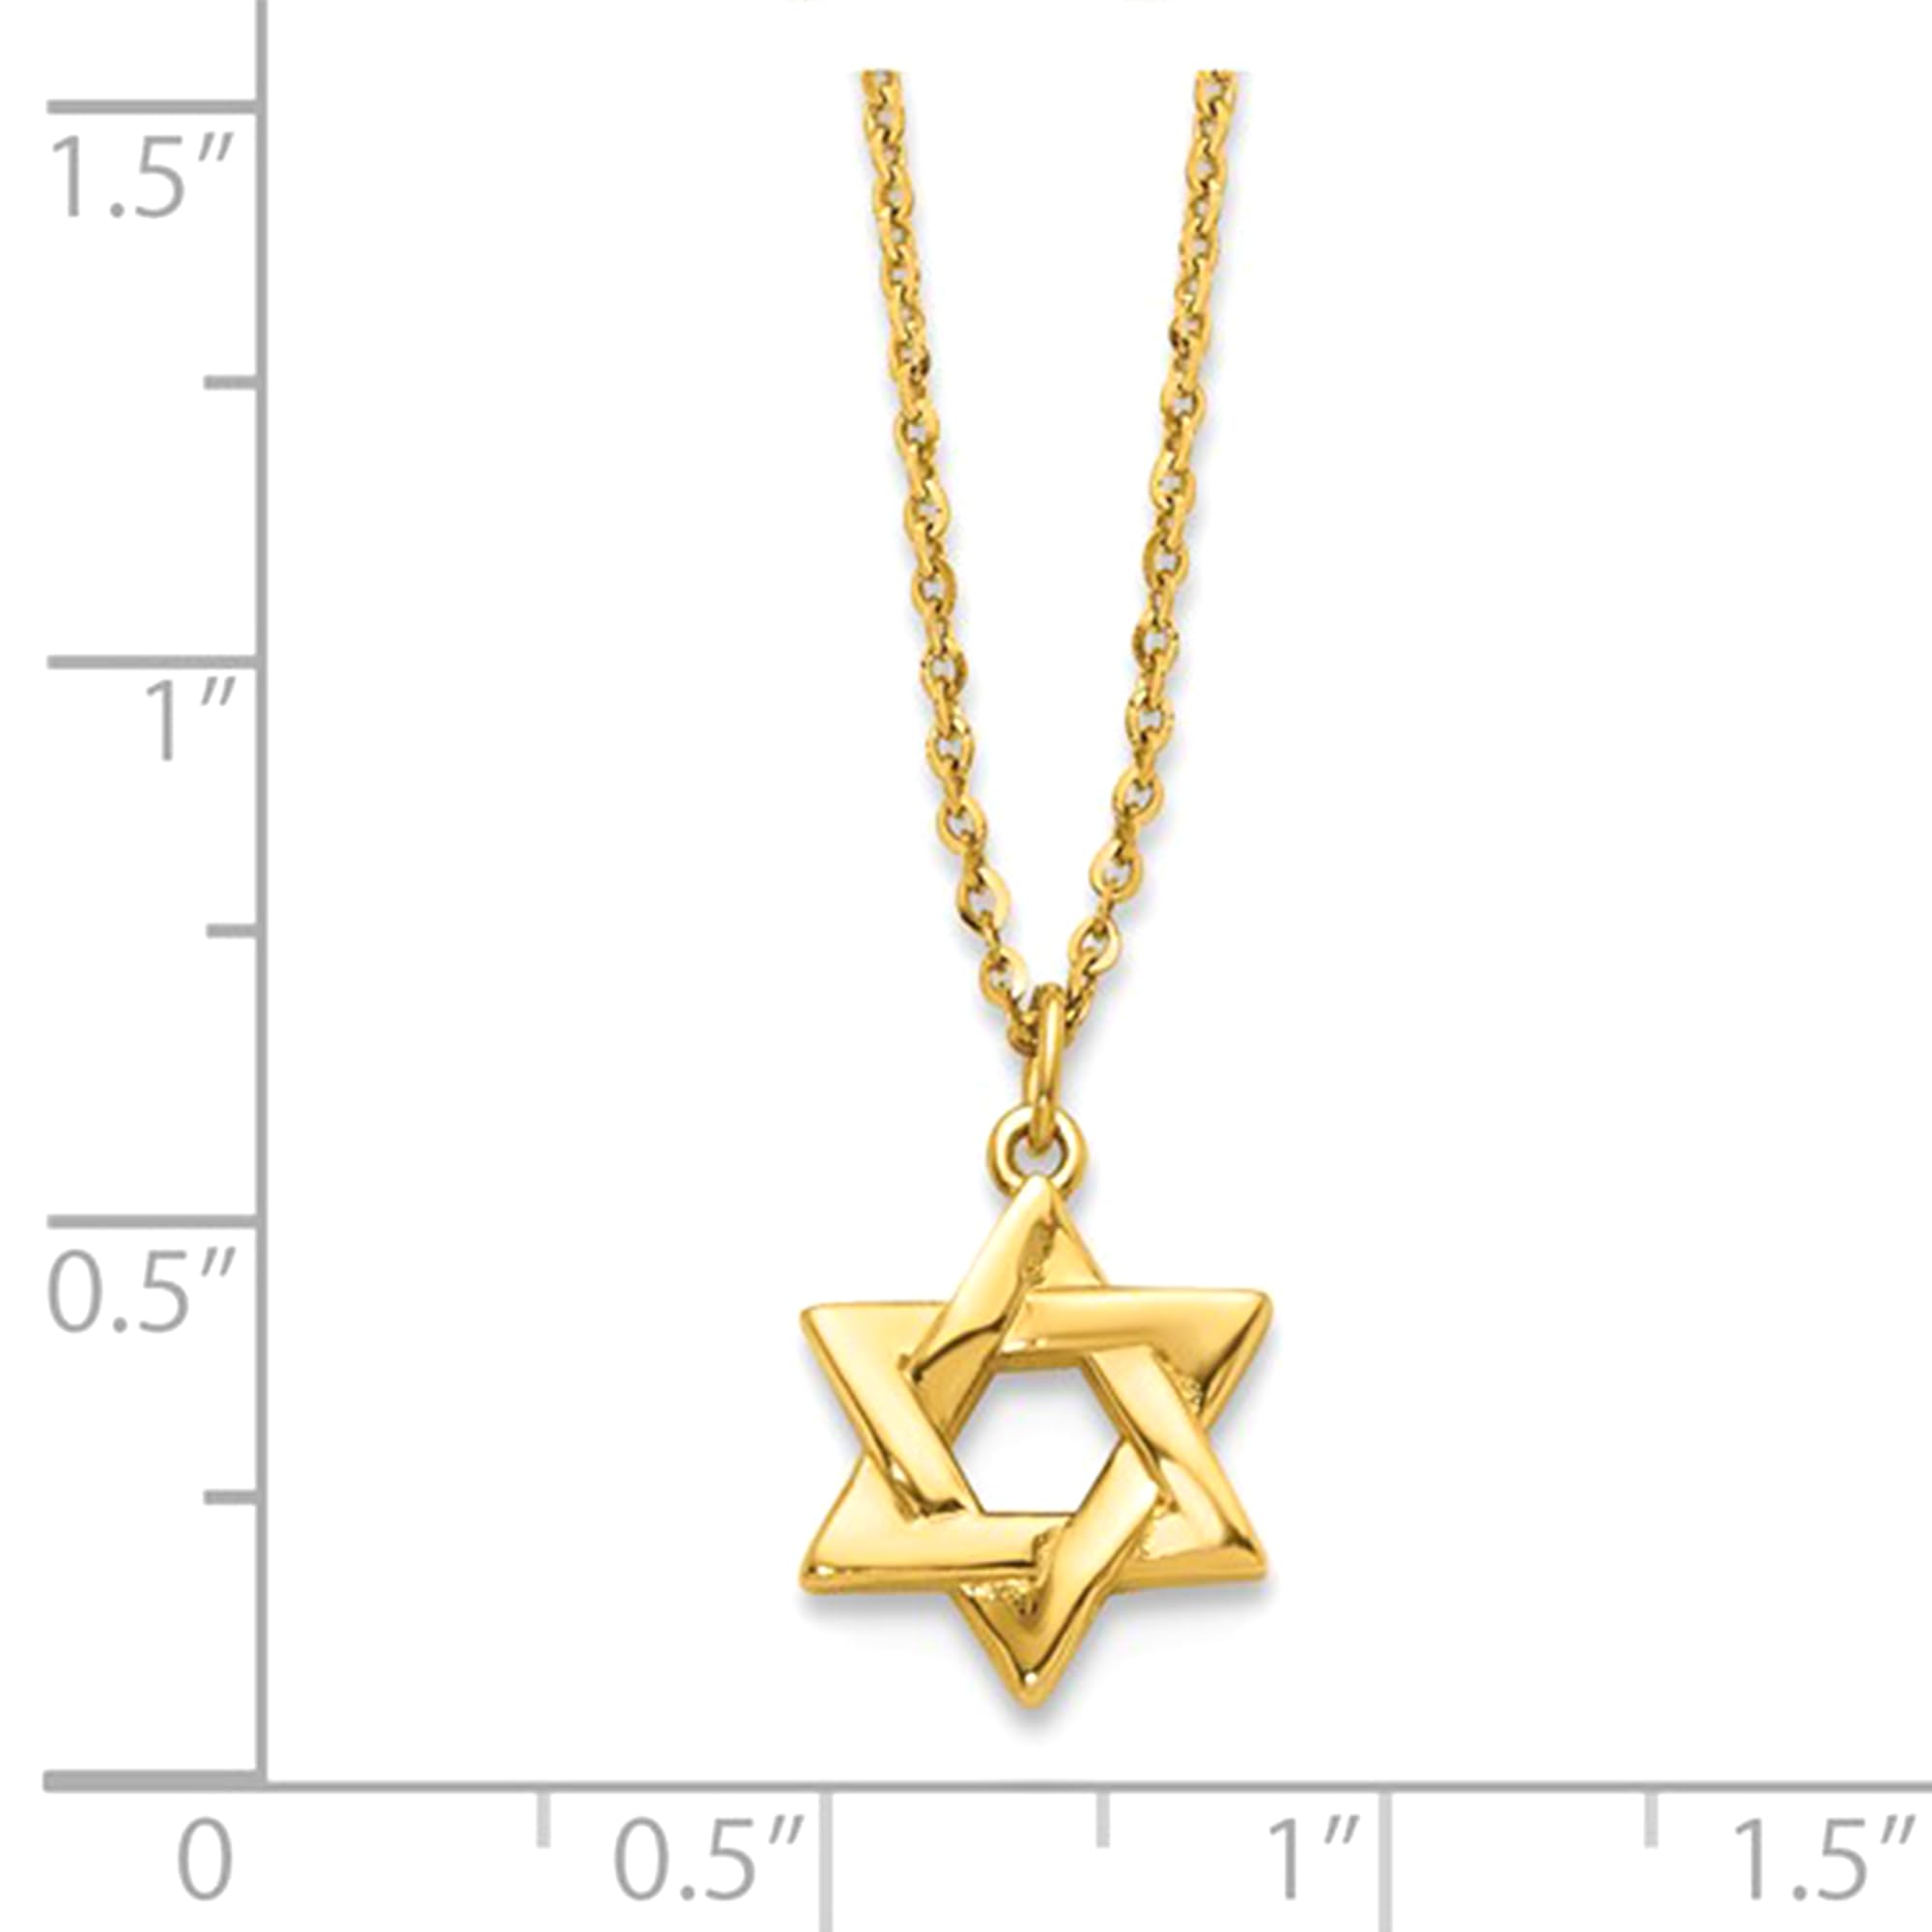 Jewelry Affairs 14K Real Yellow Adjustable Gold Star of David Pendant Charm Necklace, 16 to 18 Inches